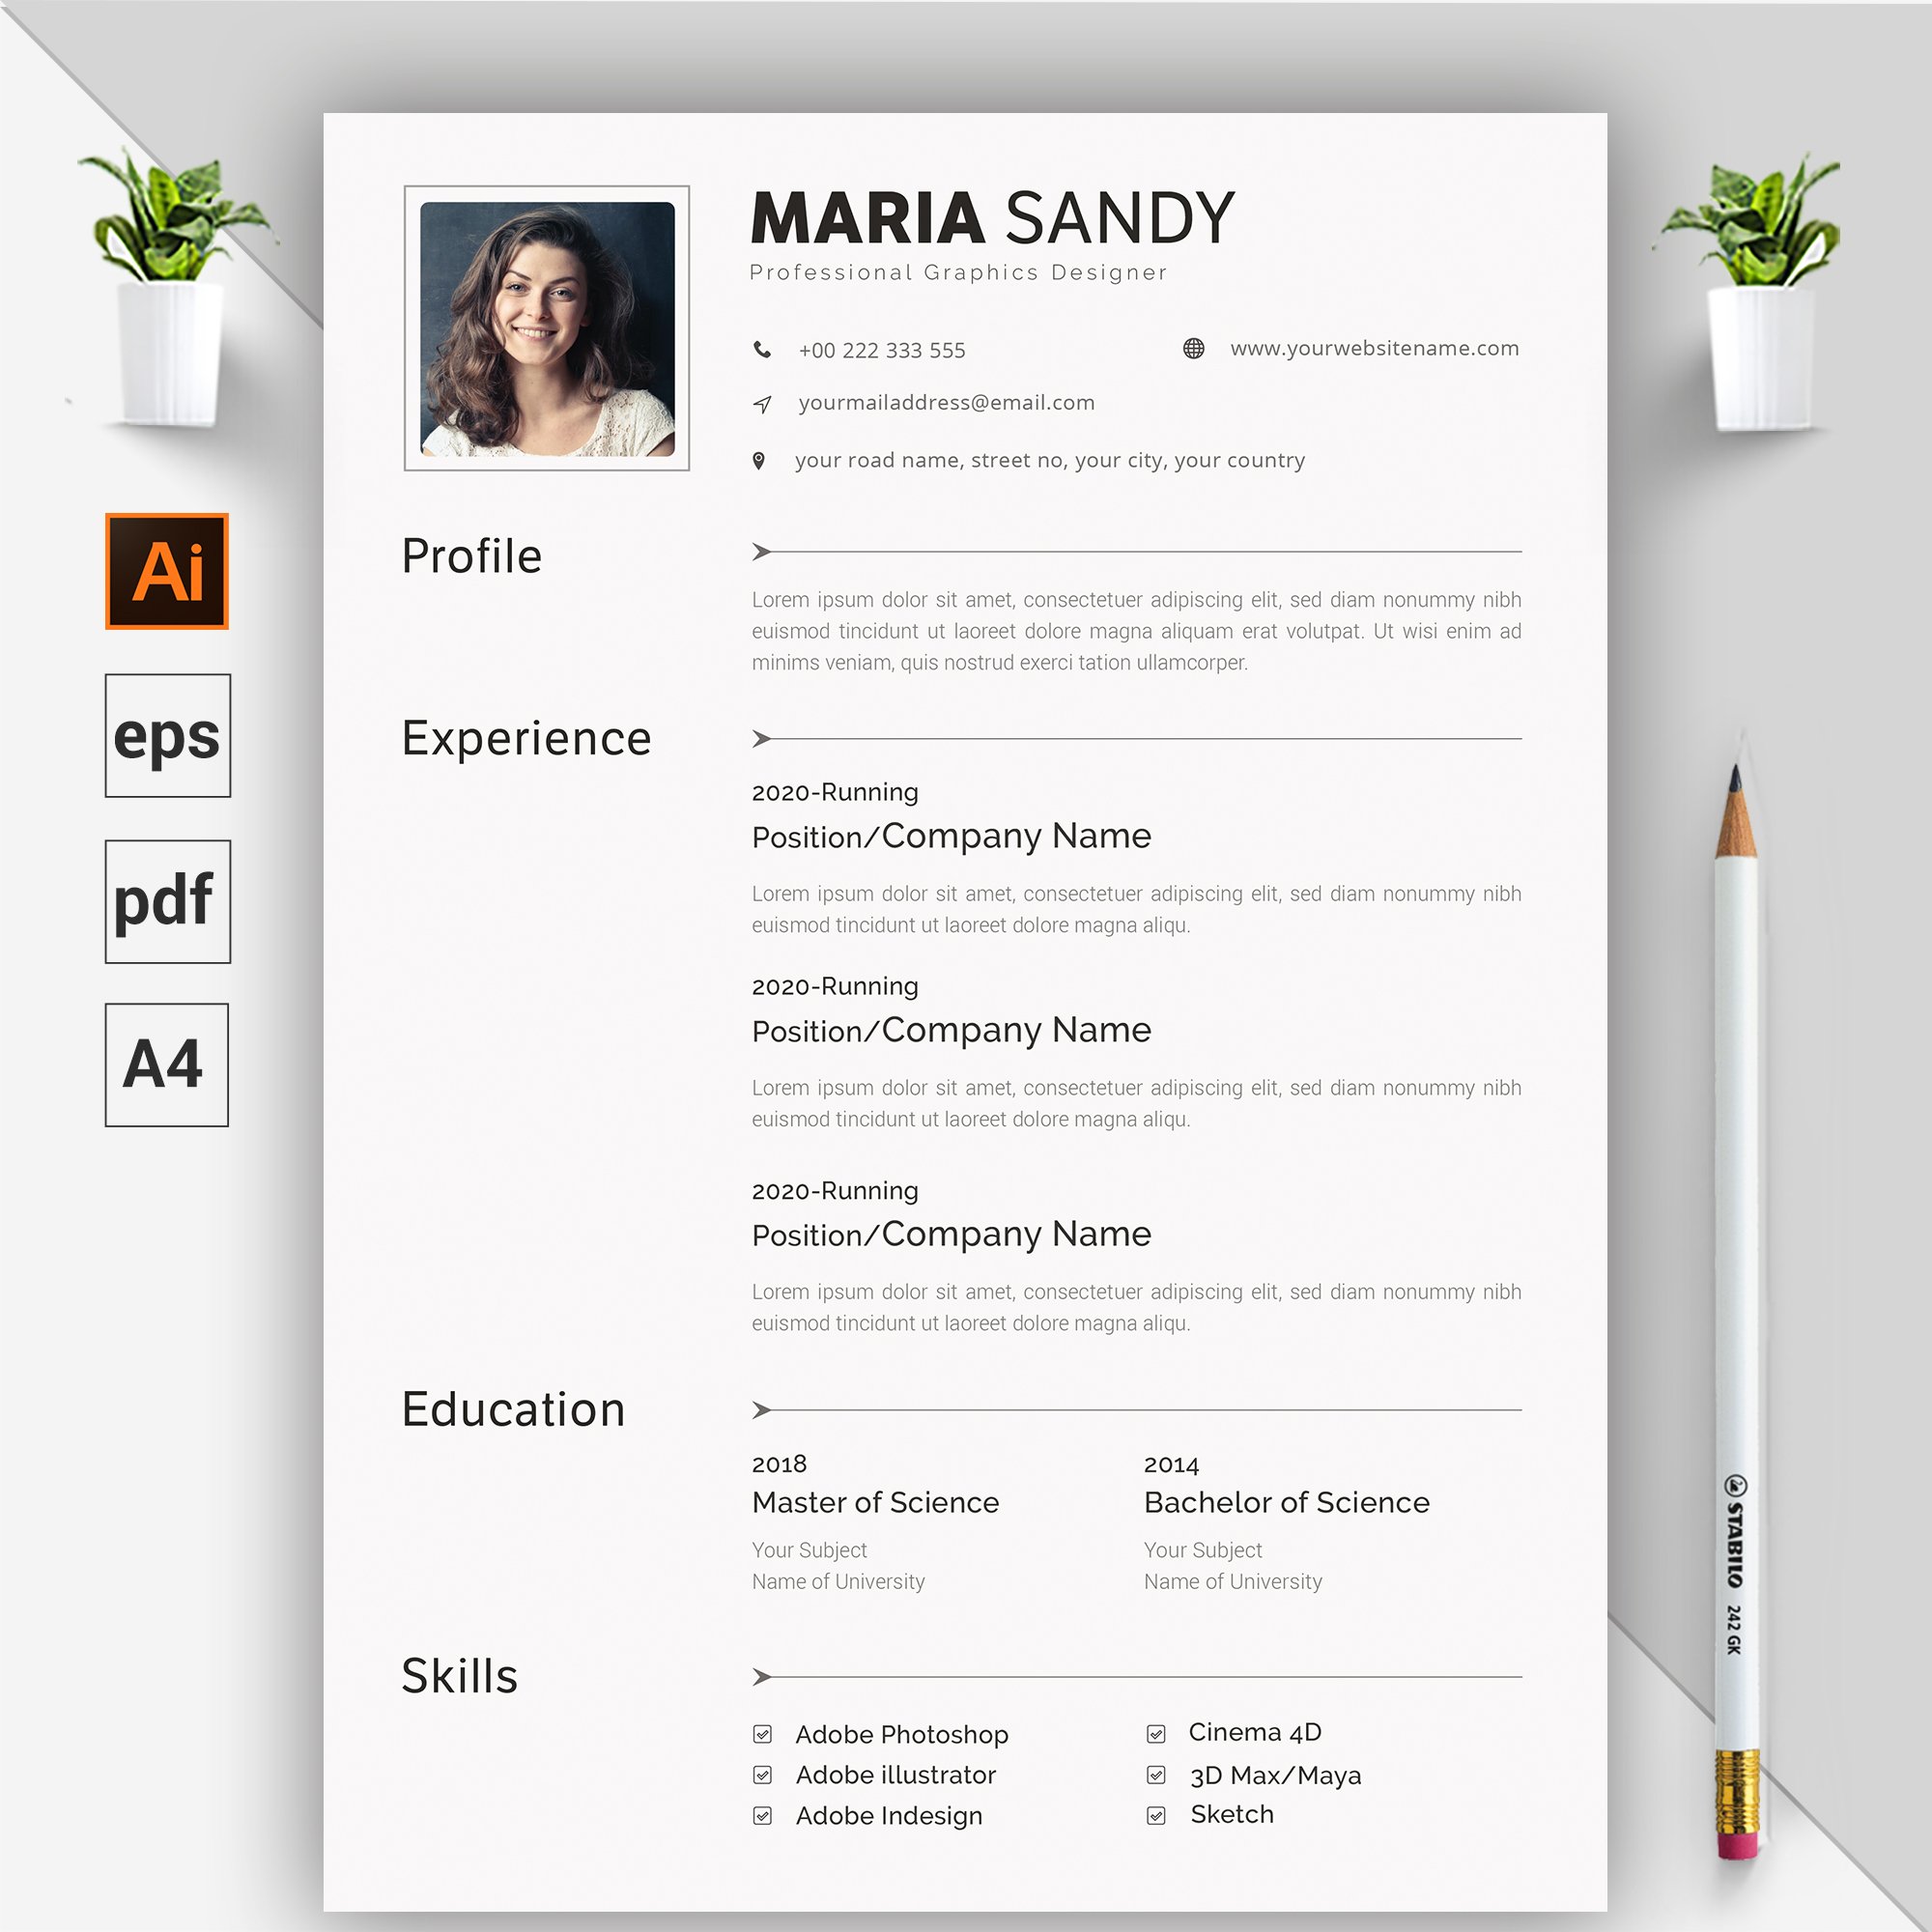 CV / Resume Template preview image.